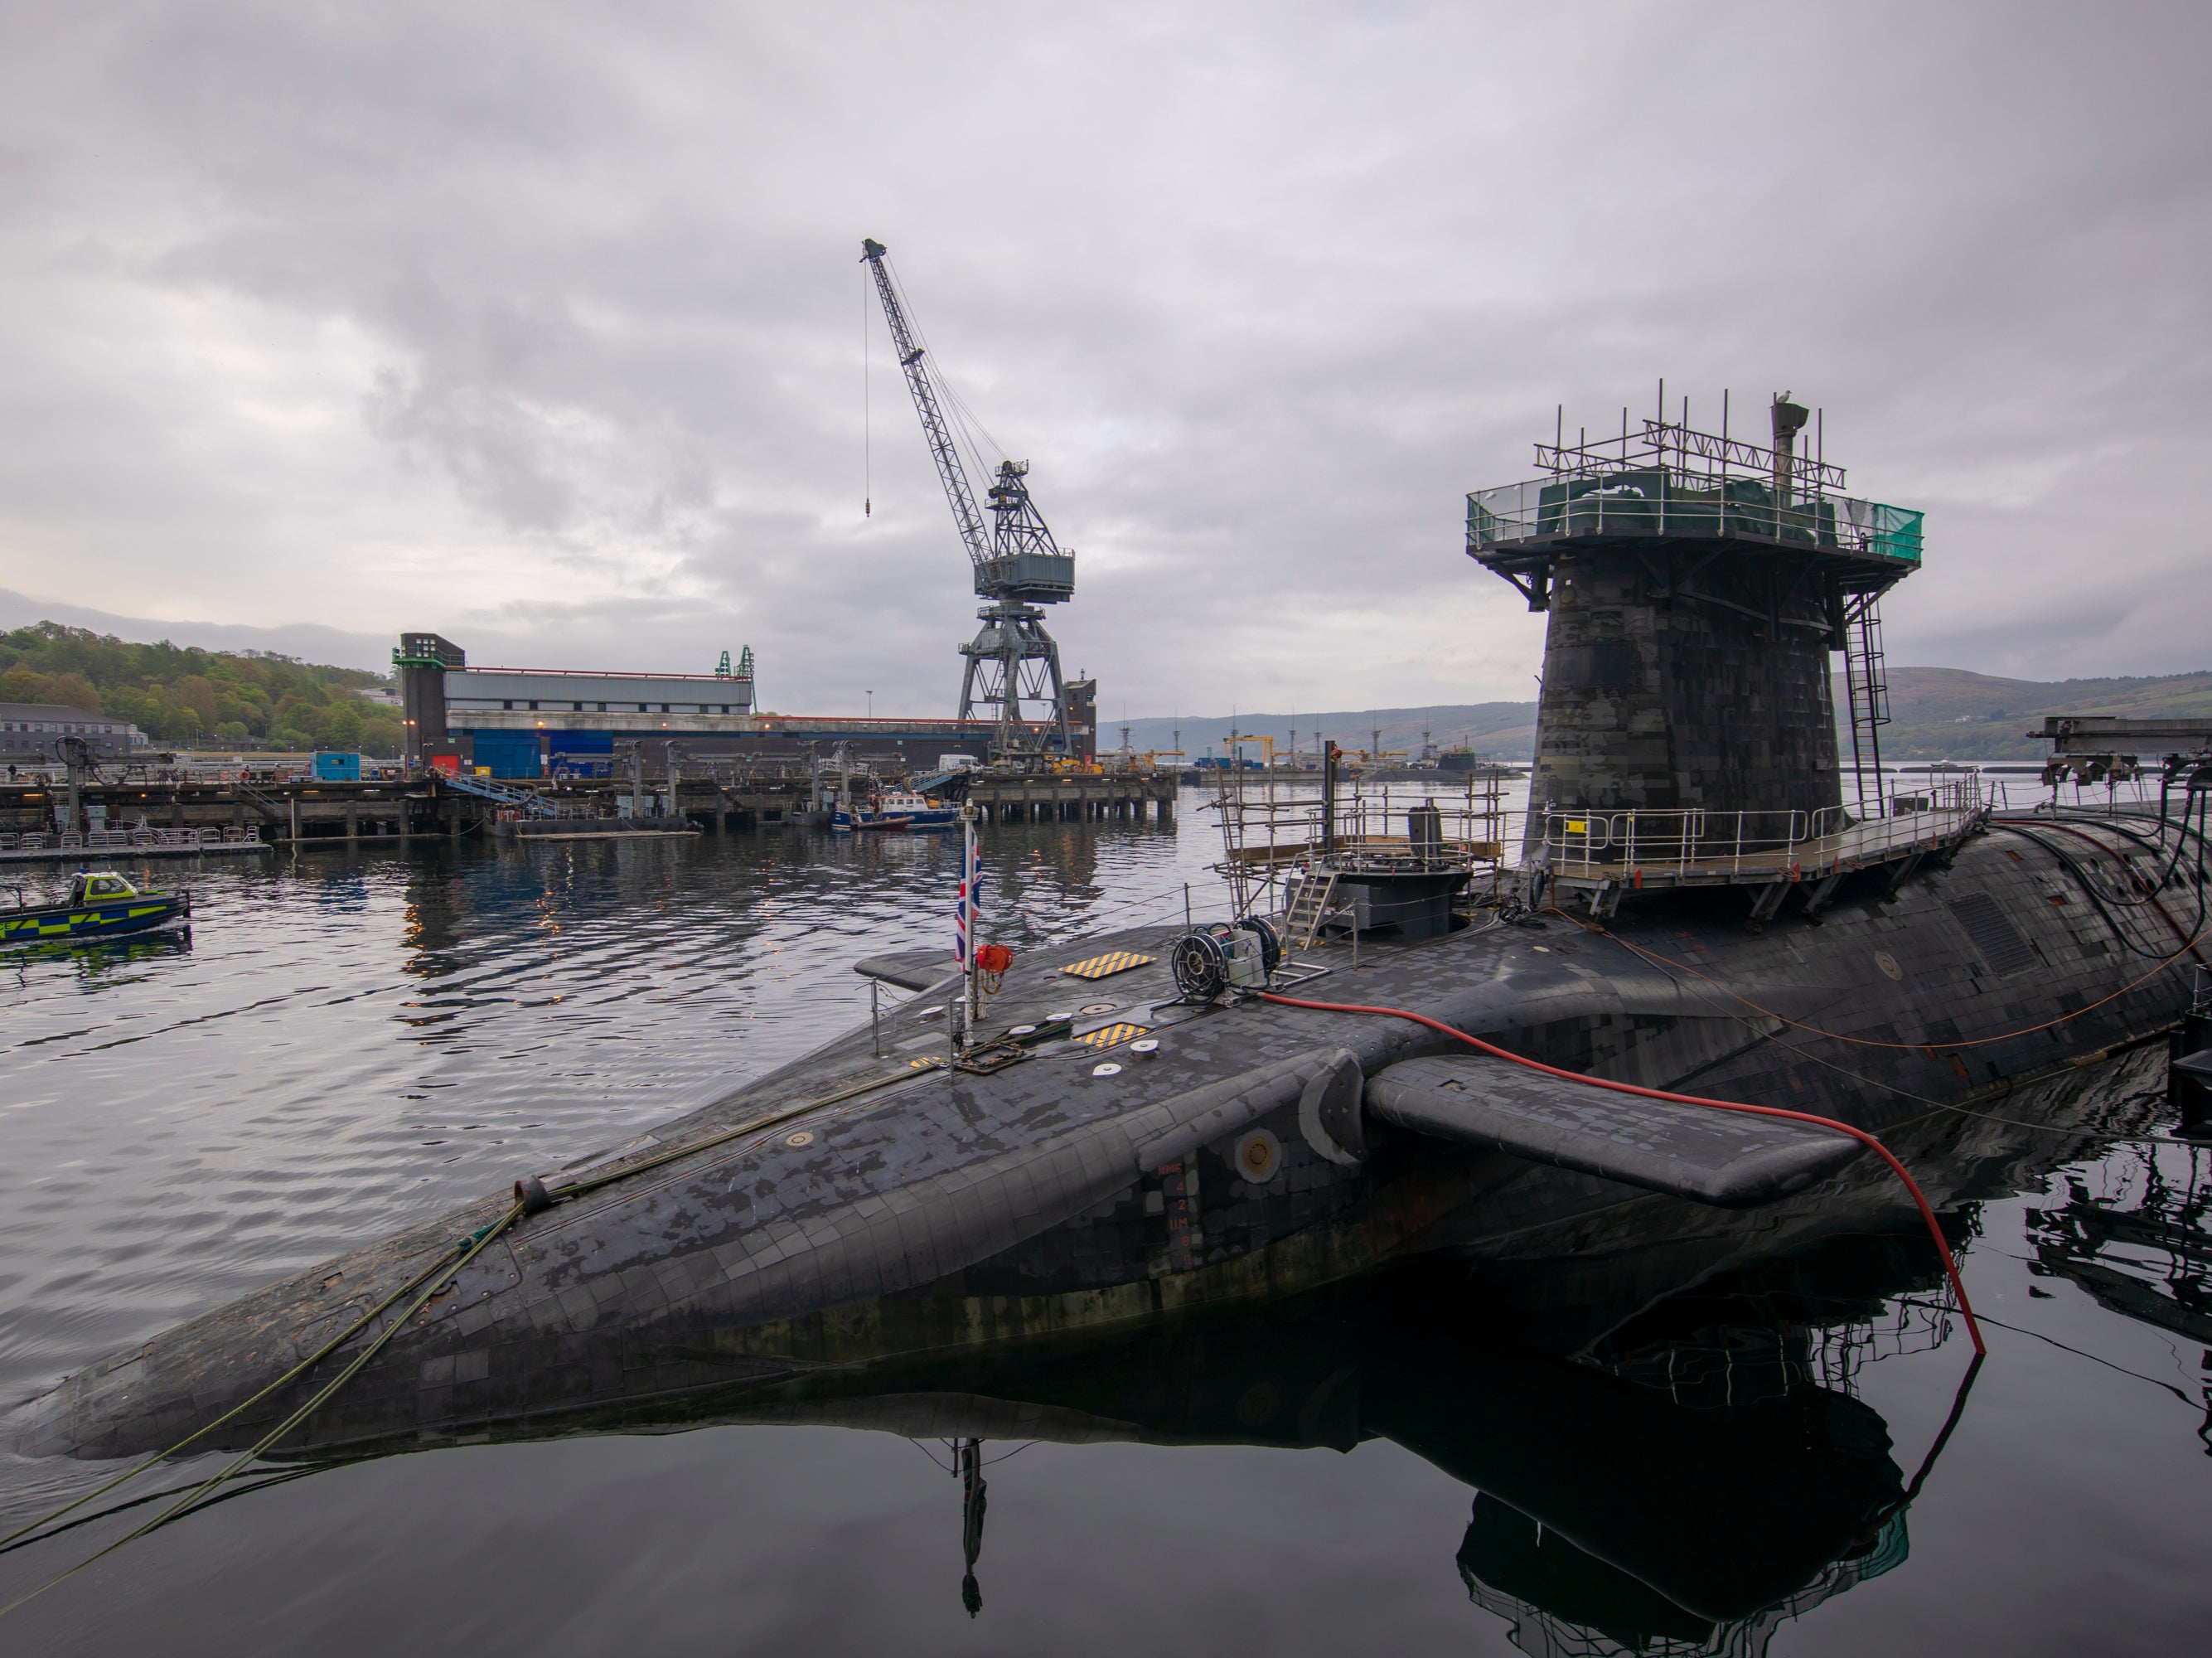 General view of HMS Vigilant, which carries the UK’s Trident nuclear deterrent, taken in April 2019 in Faslane